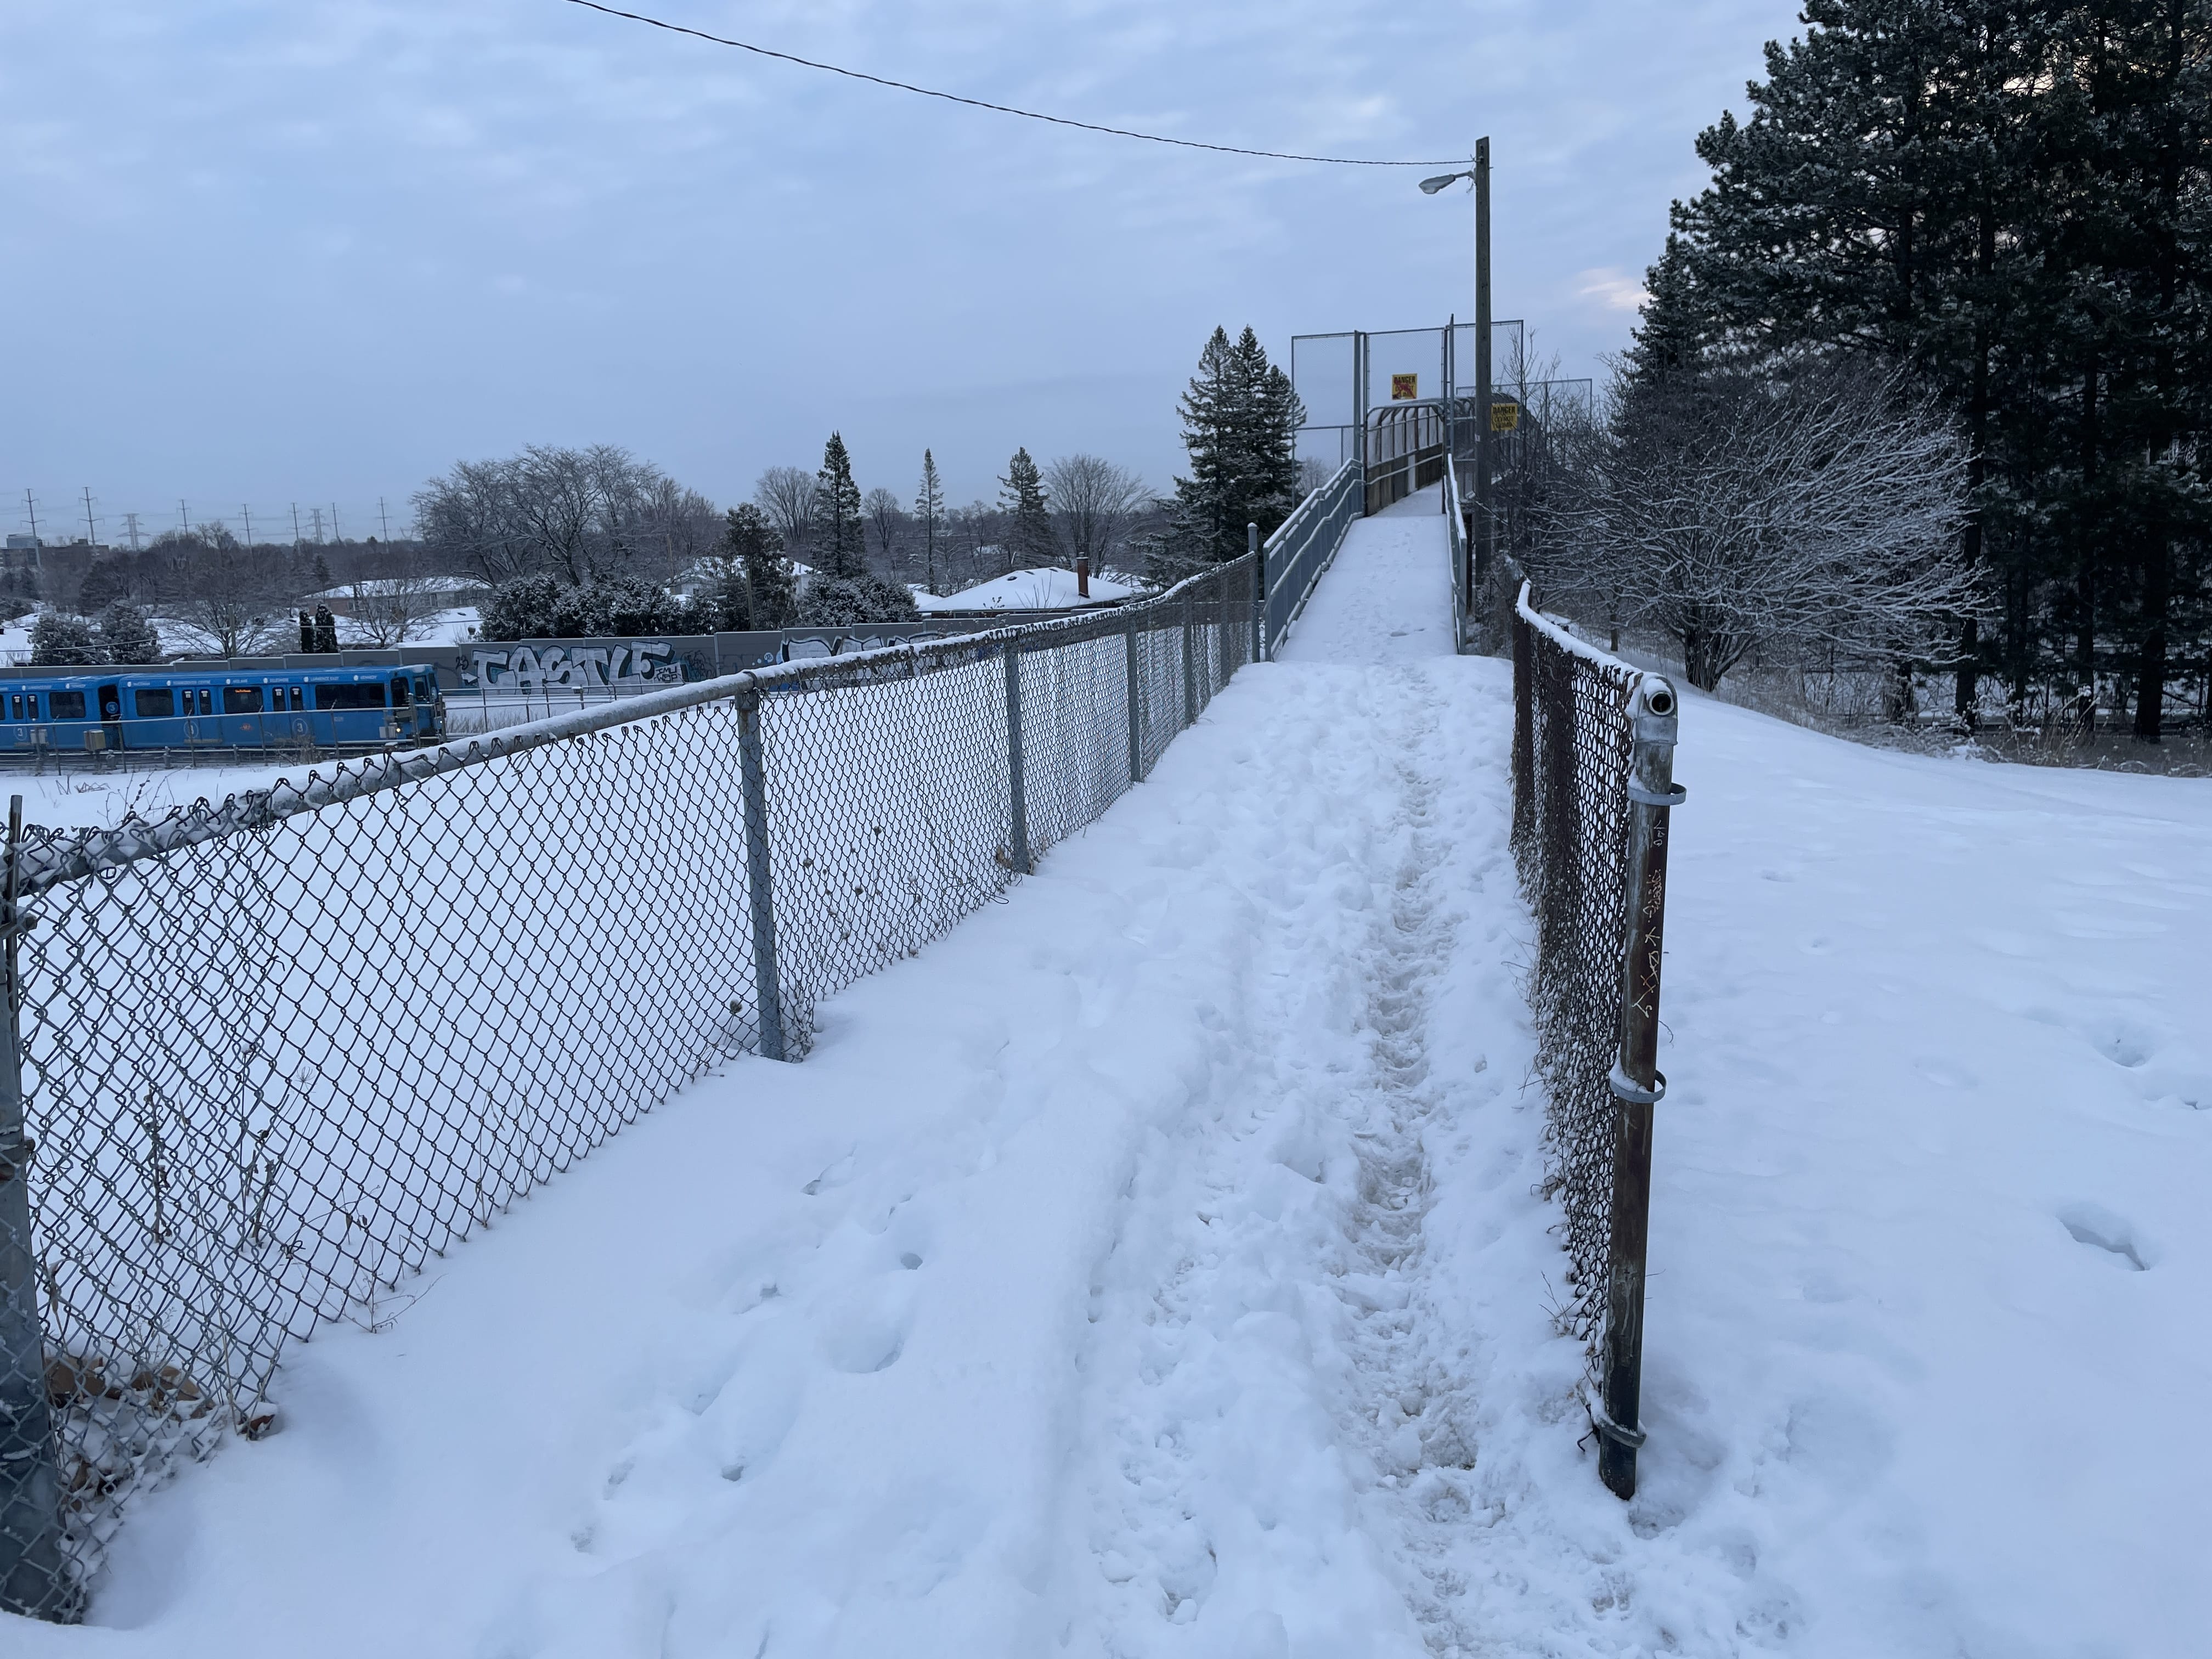 Daytime photo of the pedestrian bridge over the RT line and the narrow path leading up to it on the west side. The path is covered in snow that is at least 15-30cm deep. A blue line 3 train is visible in the background, passing under the bridge.